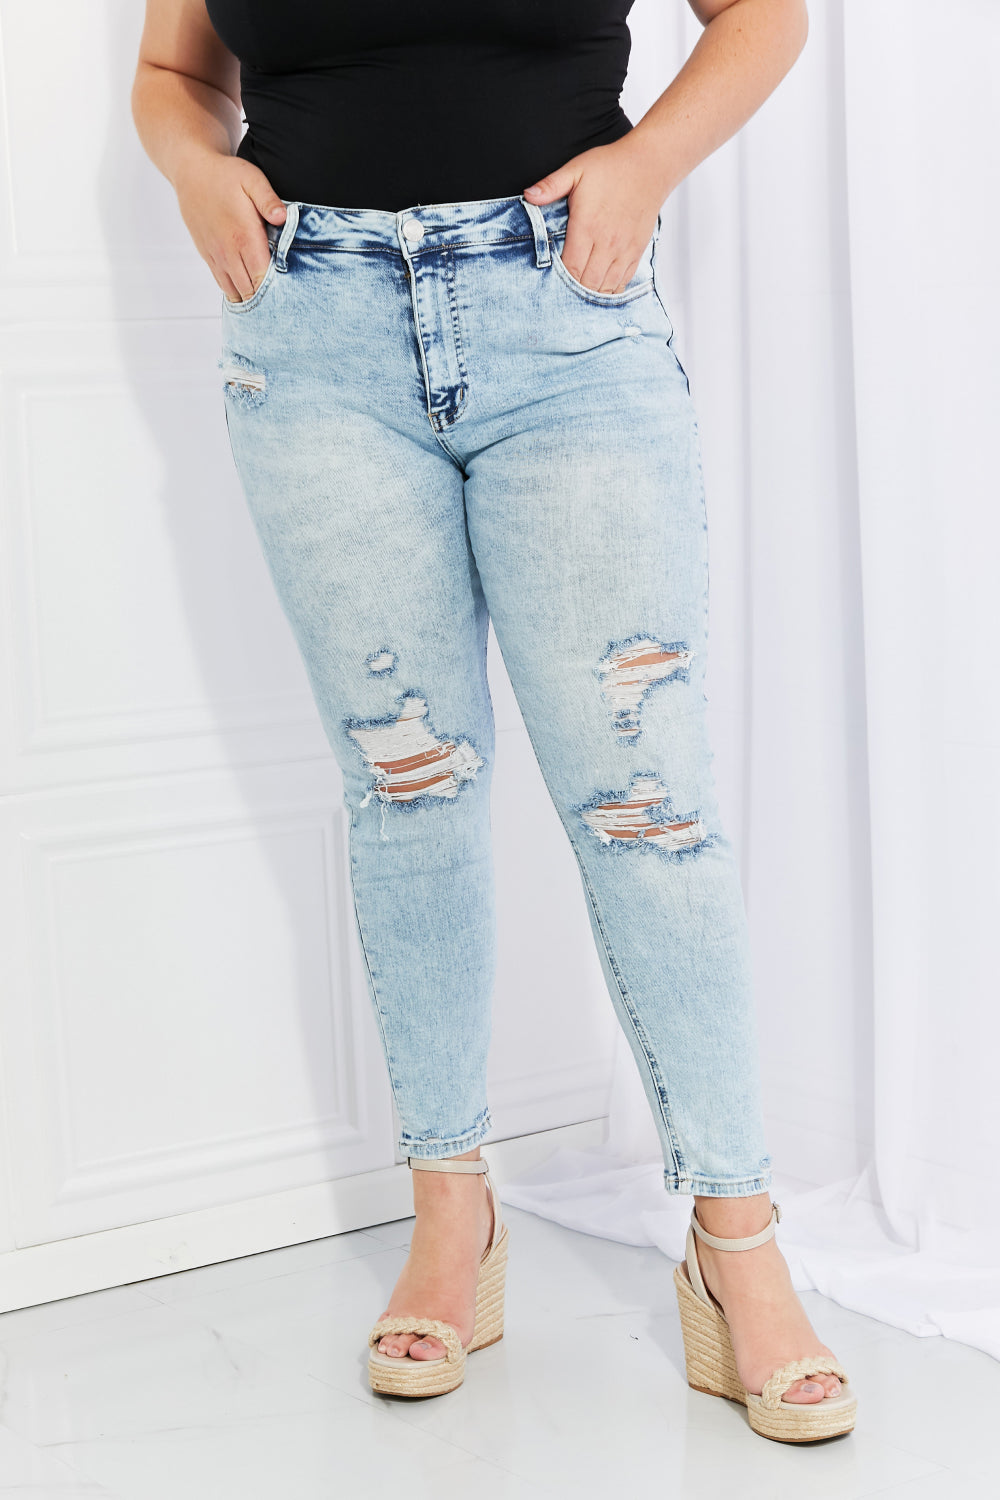 VERVET On The Road Distressed Jeans